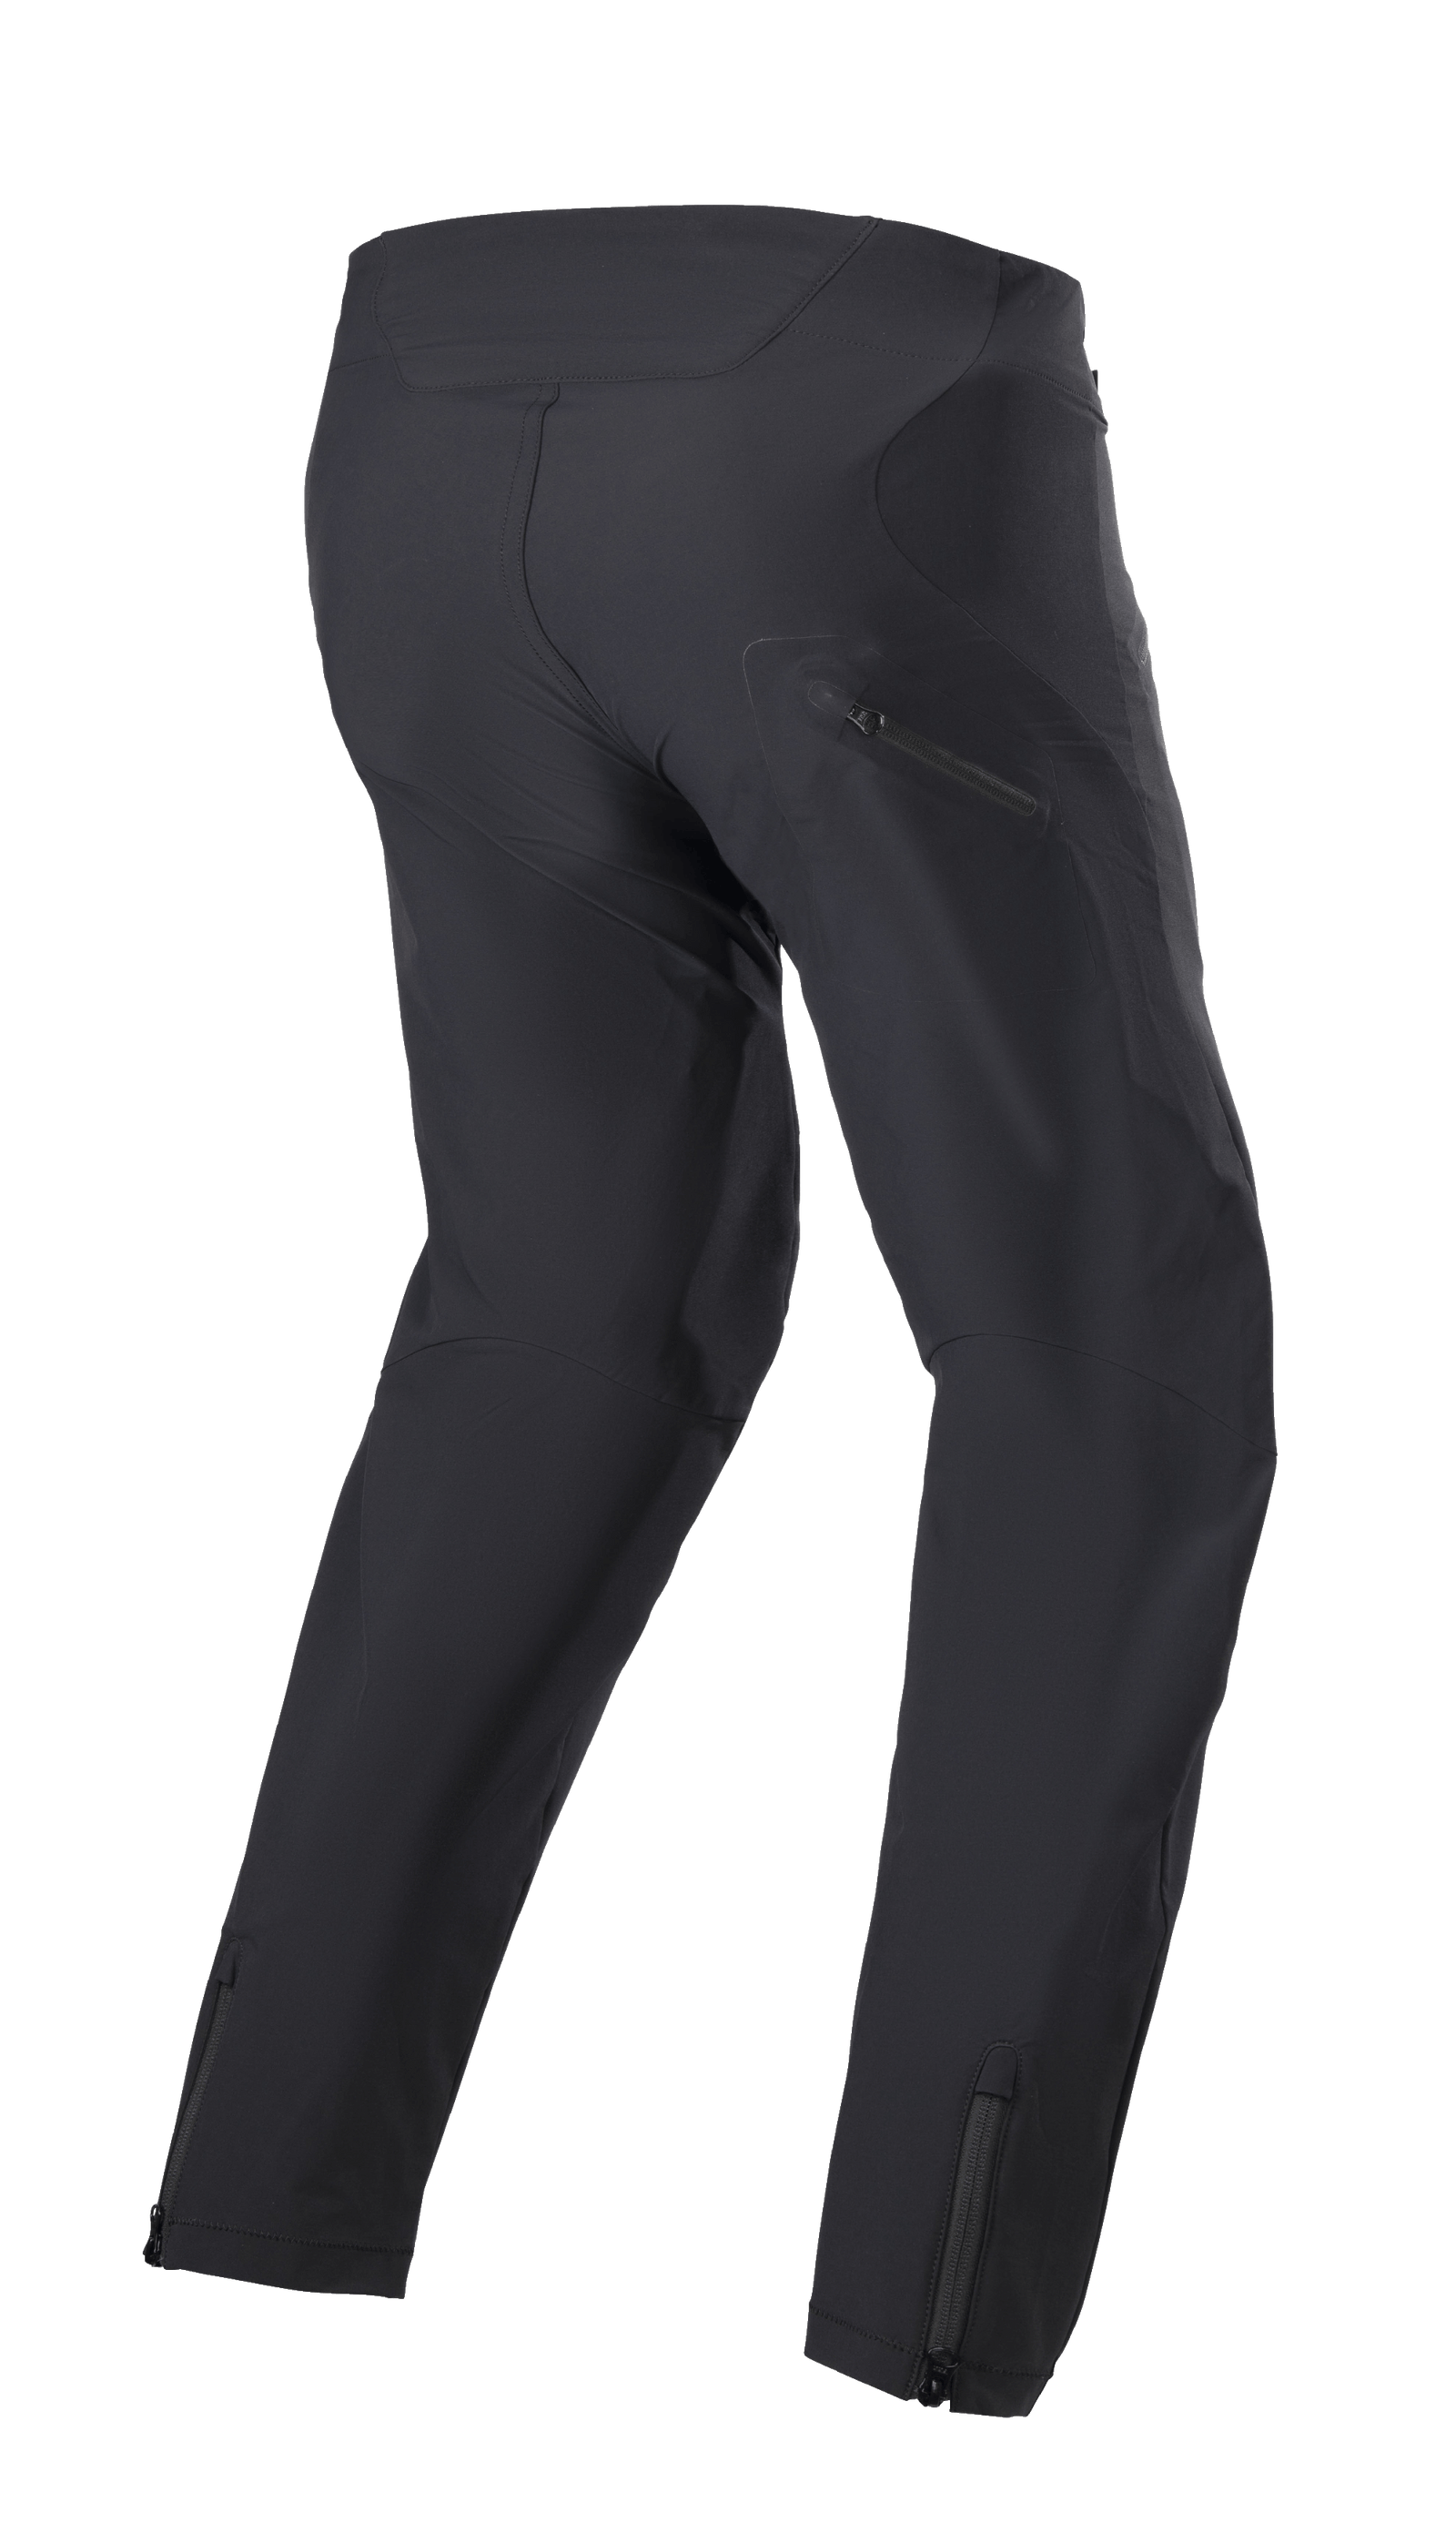 Cycling Pants | Alpinestars® Official Site